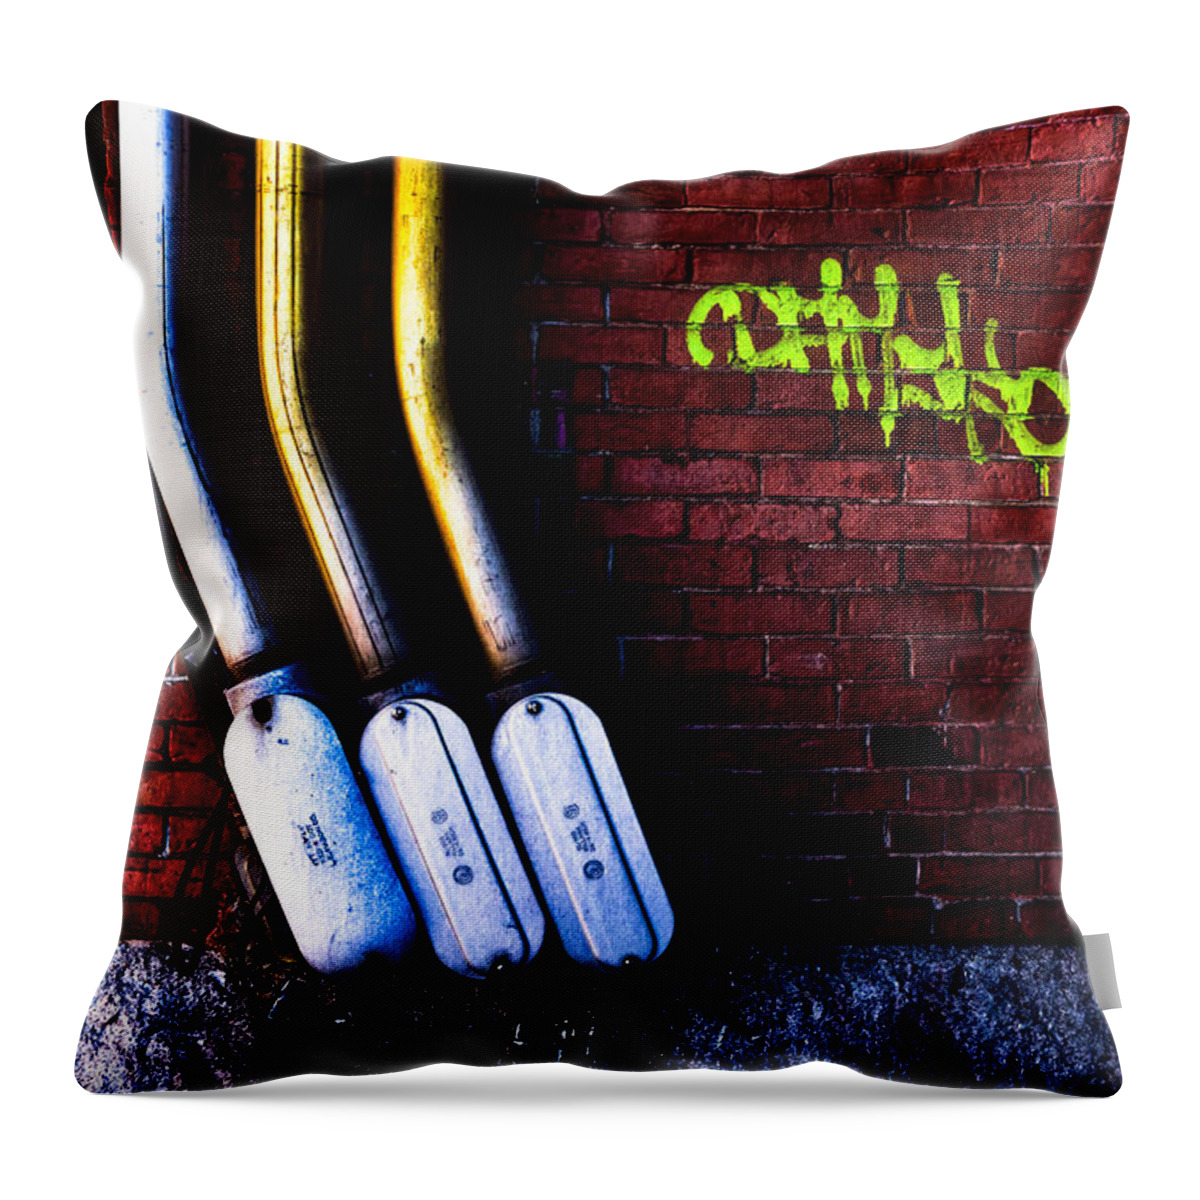 Foundation Throw Pillow featuring the photograph Foundation Number E7 by Bob Orsillo